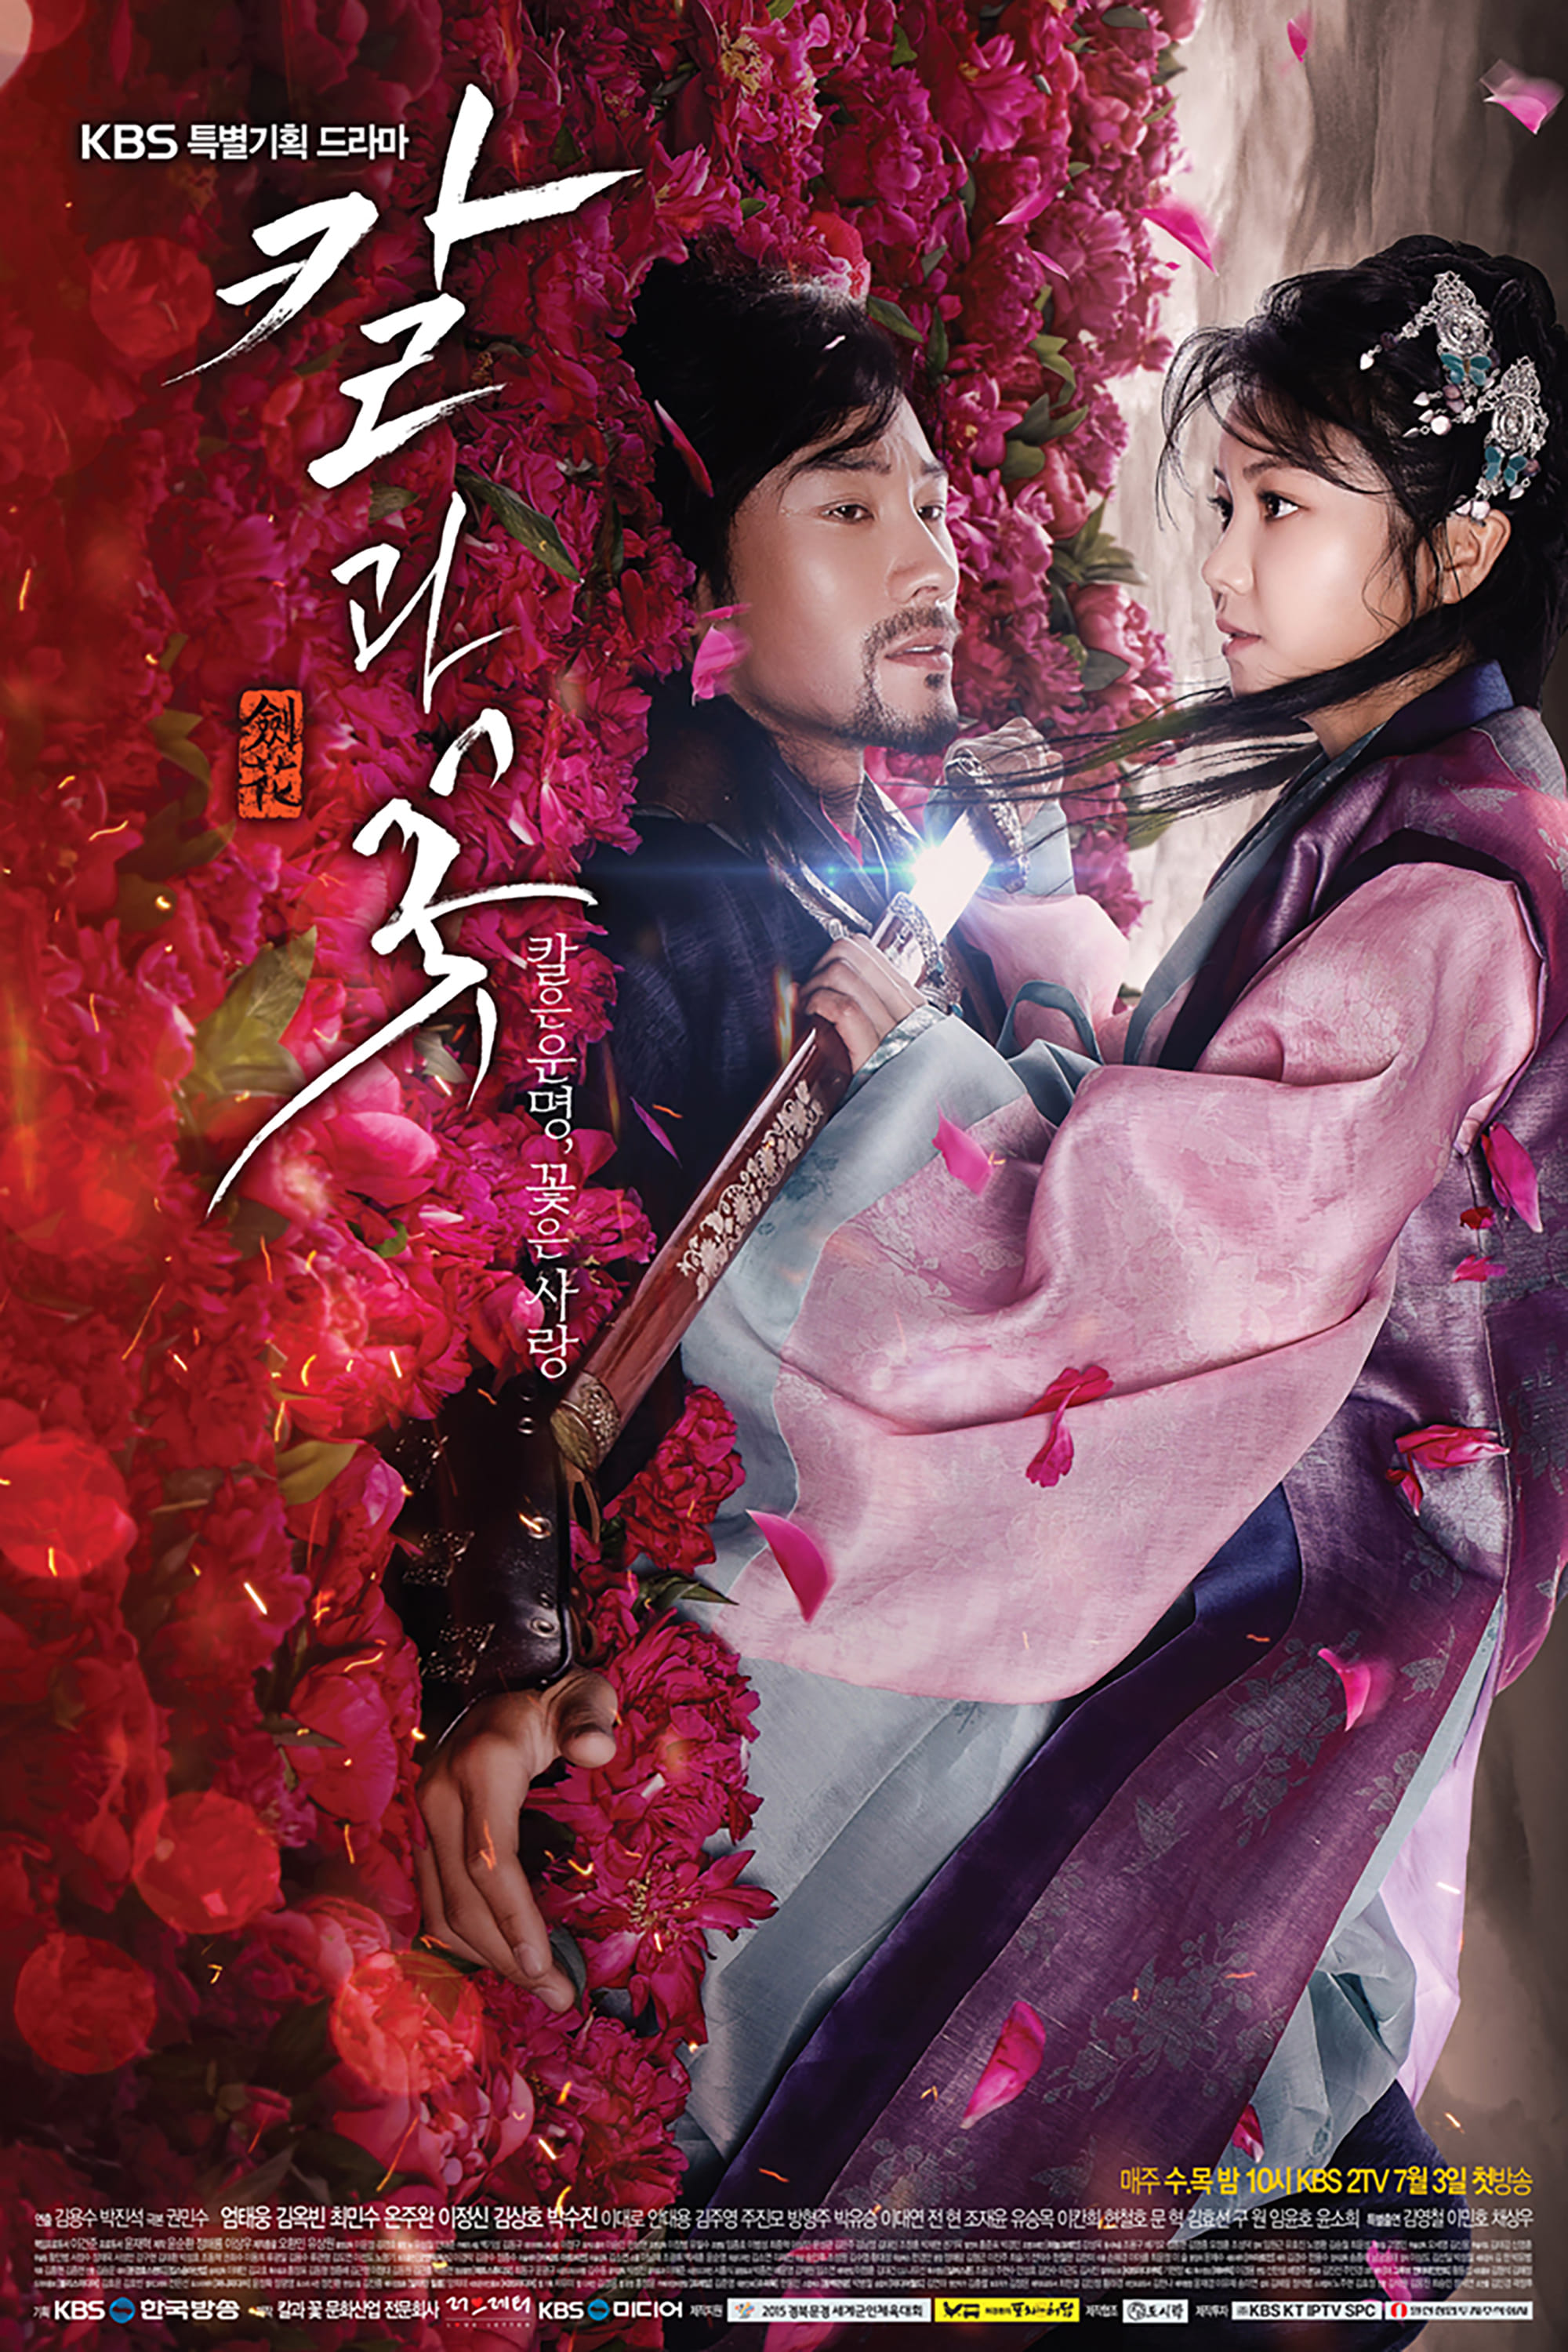 The Blade and Petal (2013)